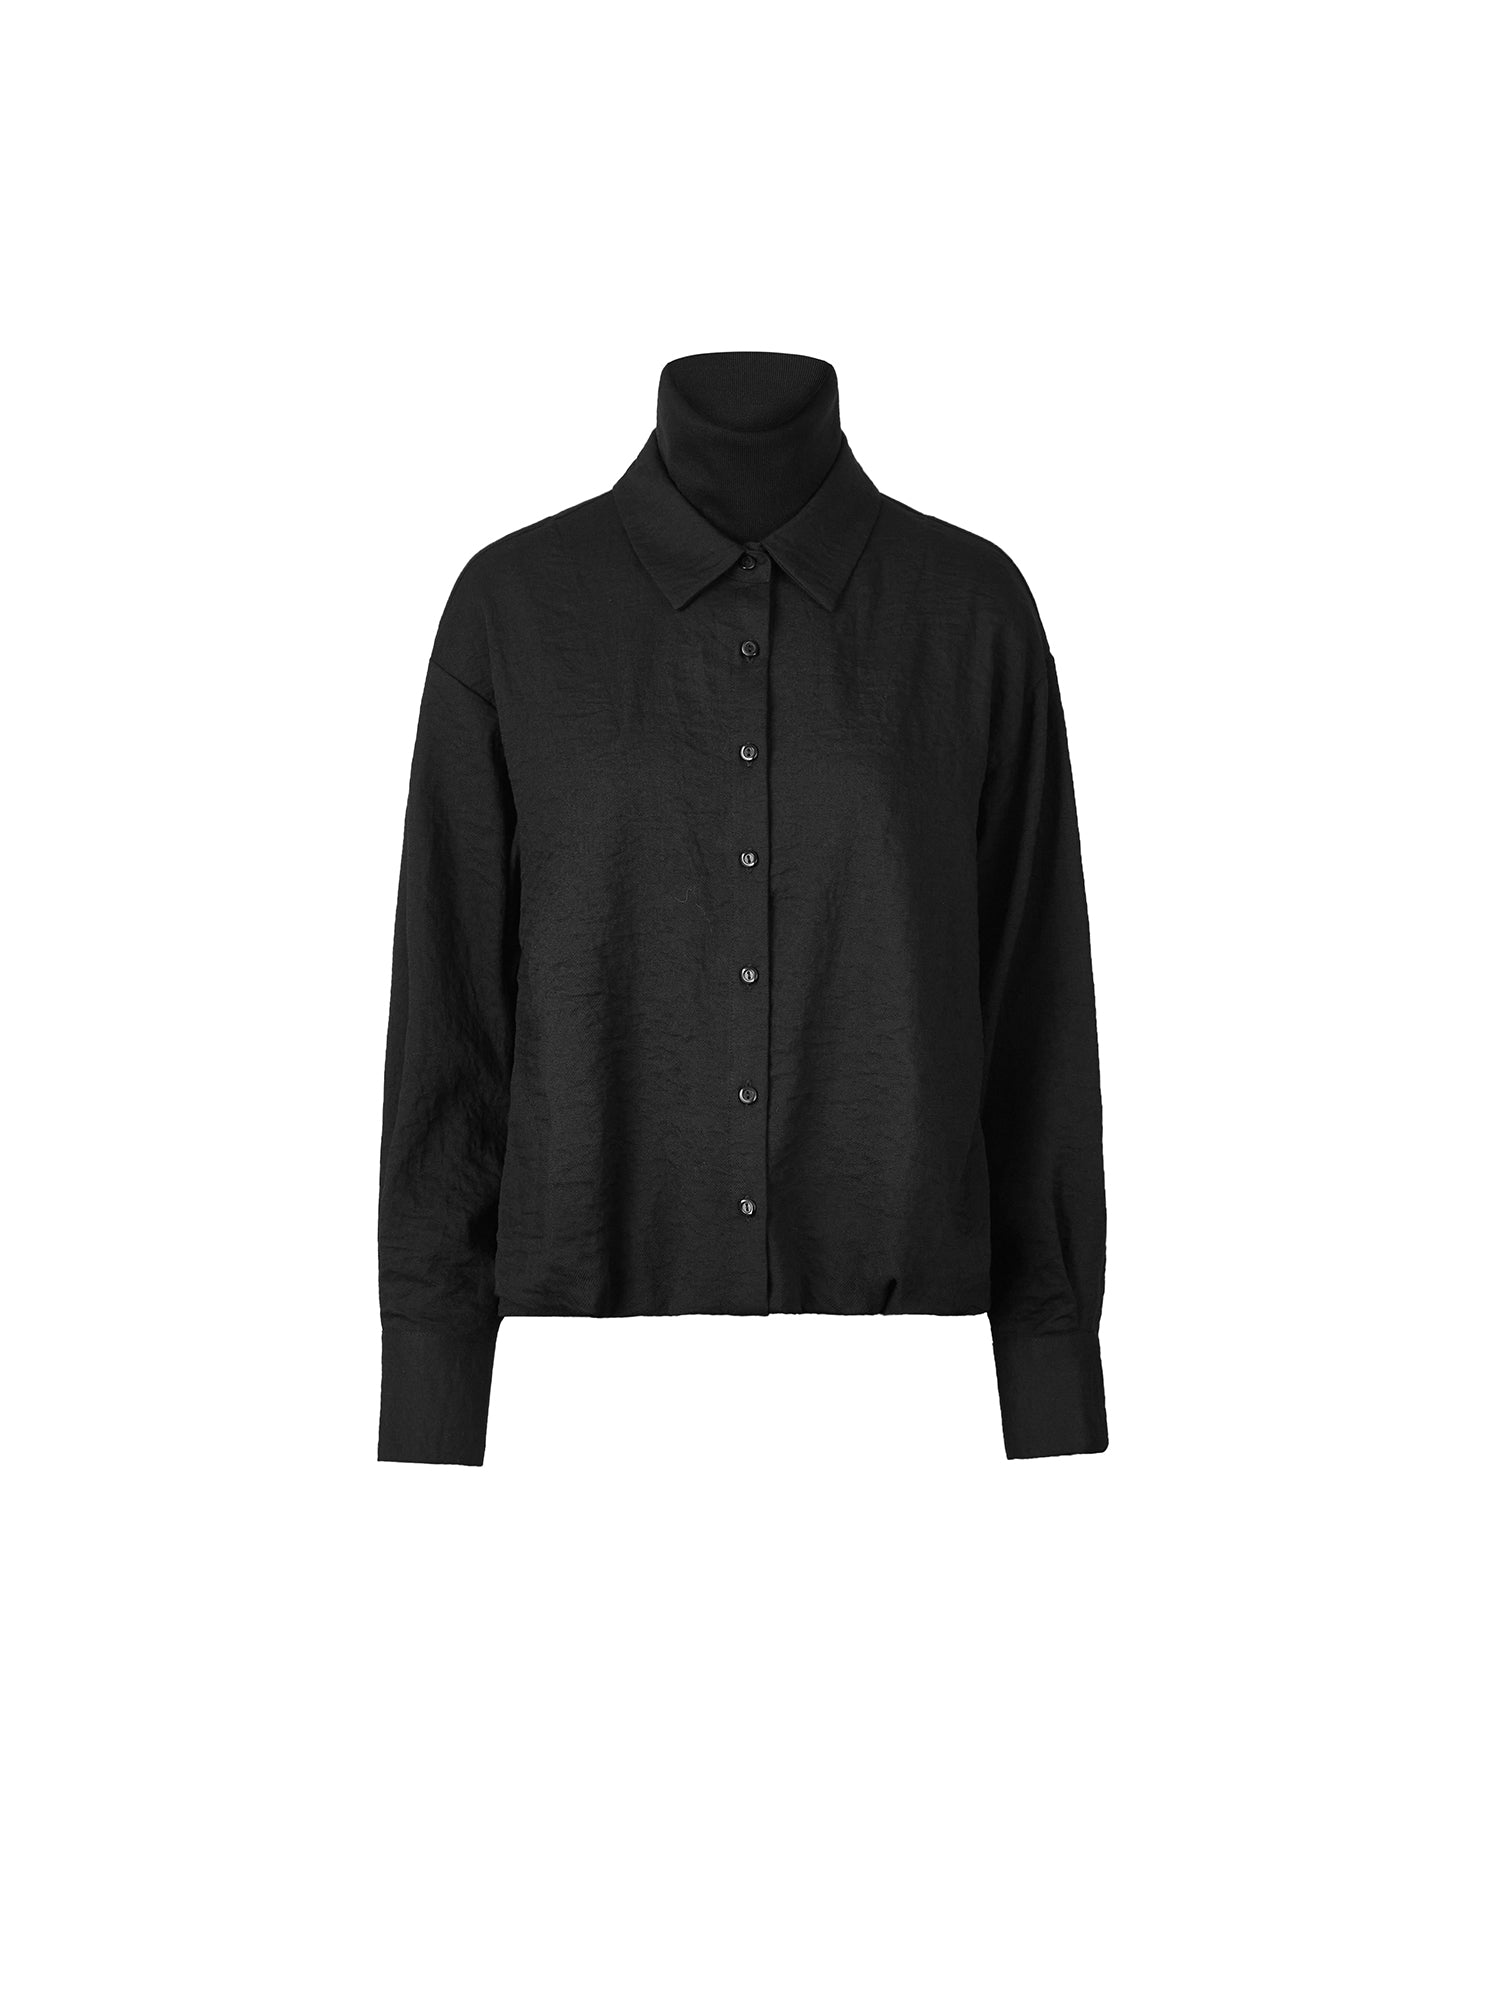 Short Black Shirt With Knit Stitching And Drop Sleeves